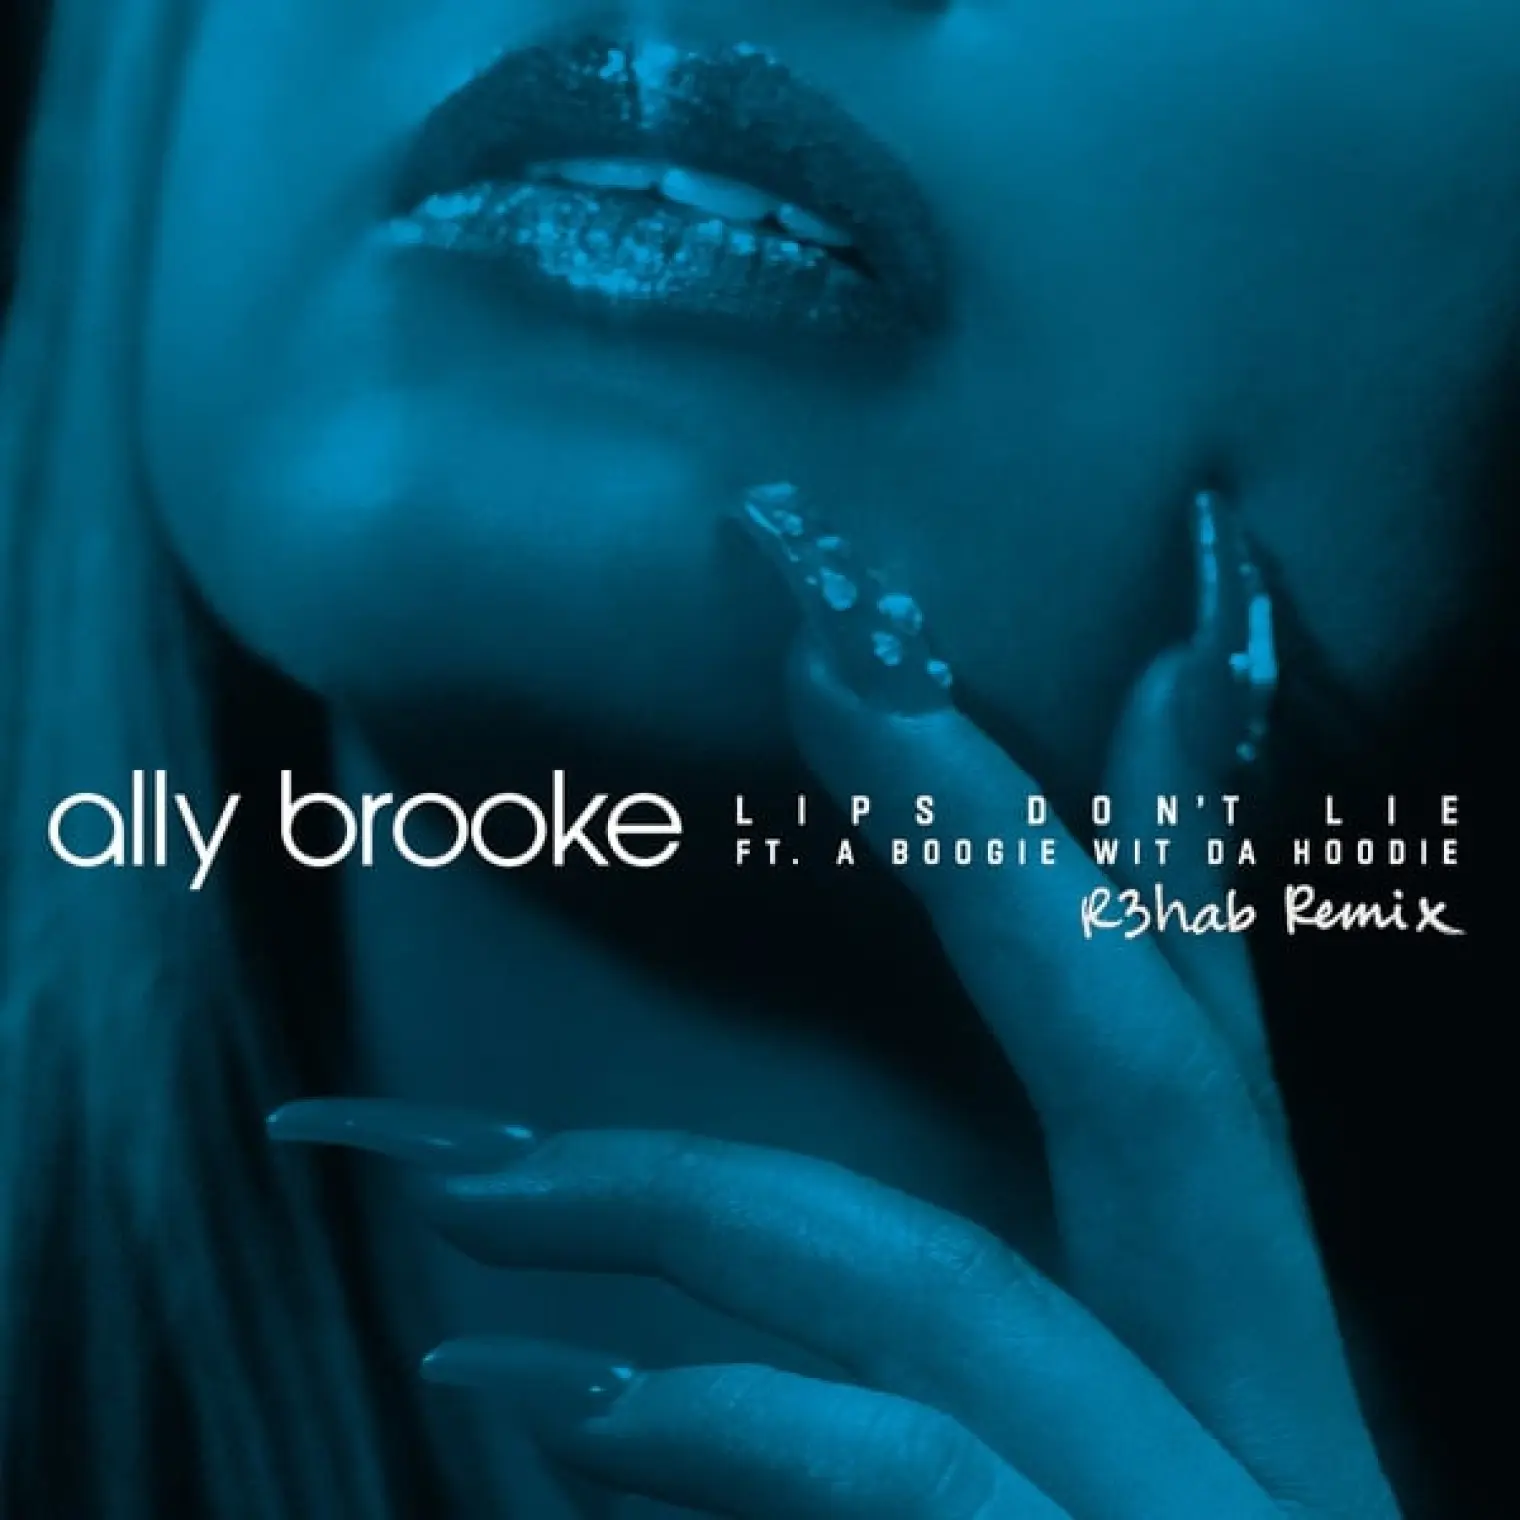 Lips Don't Lie (feat. A Boogie Wit da Hoodie) (R3HAB Remix) -  Ally Brooke 